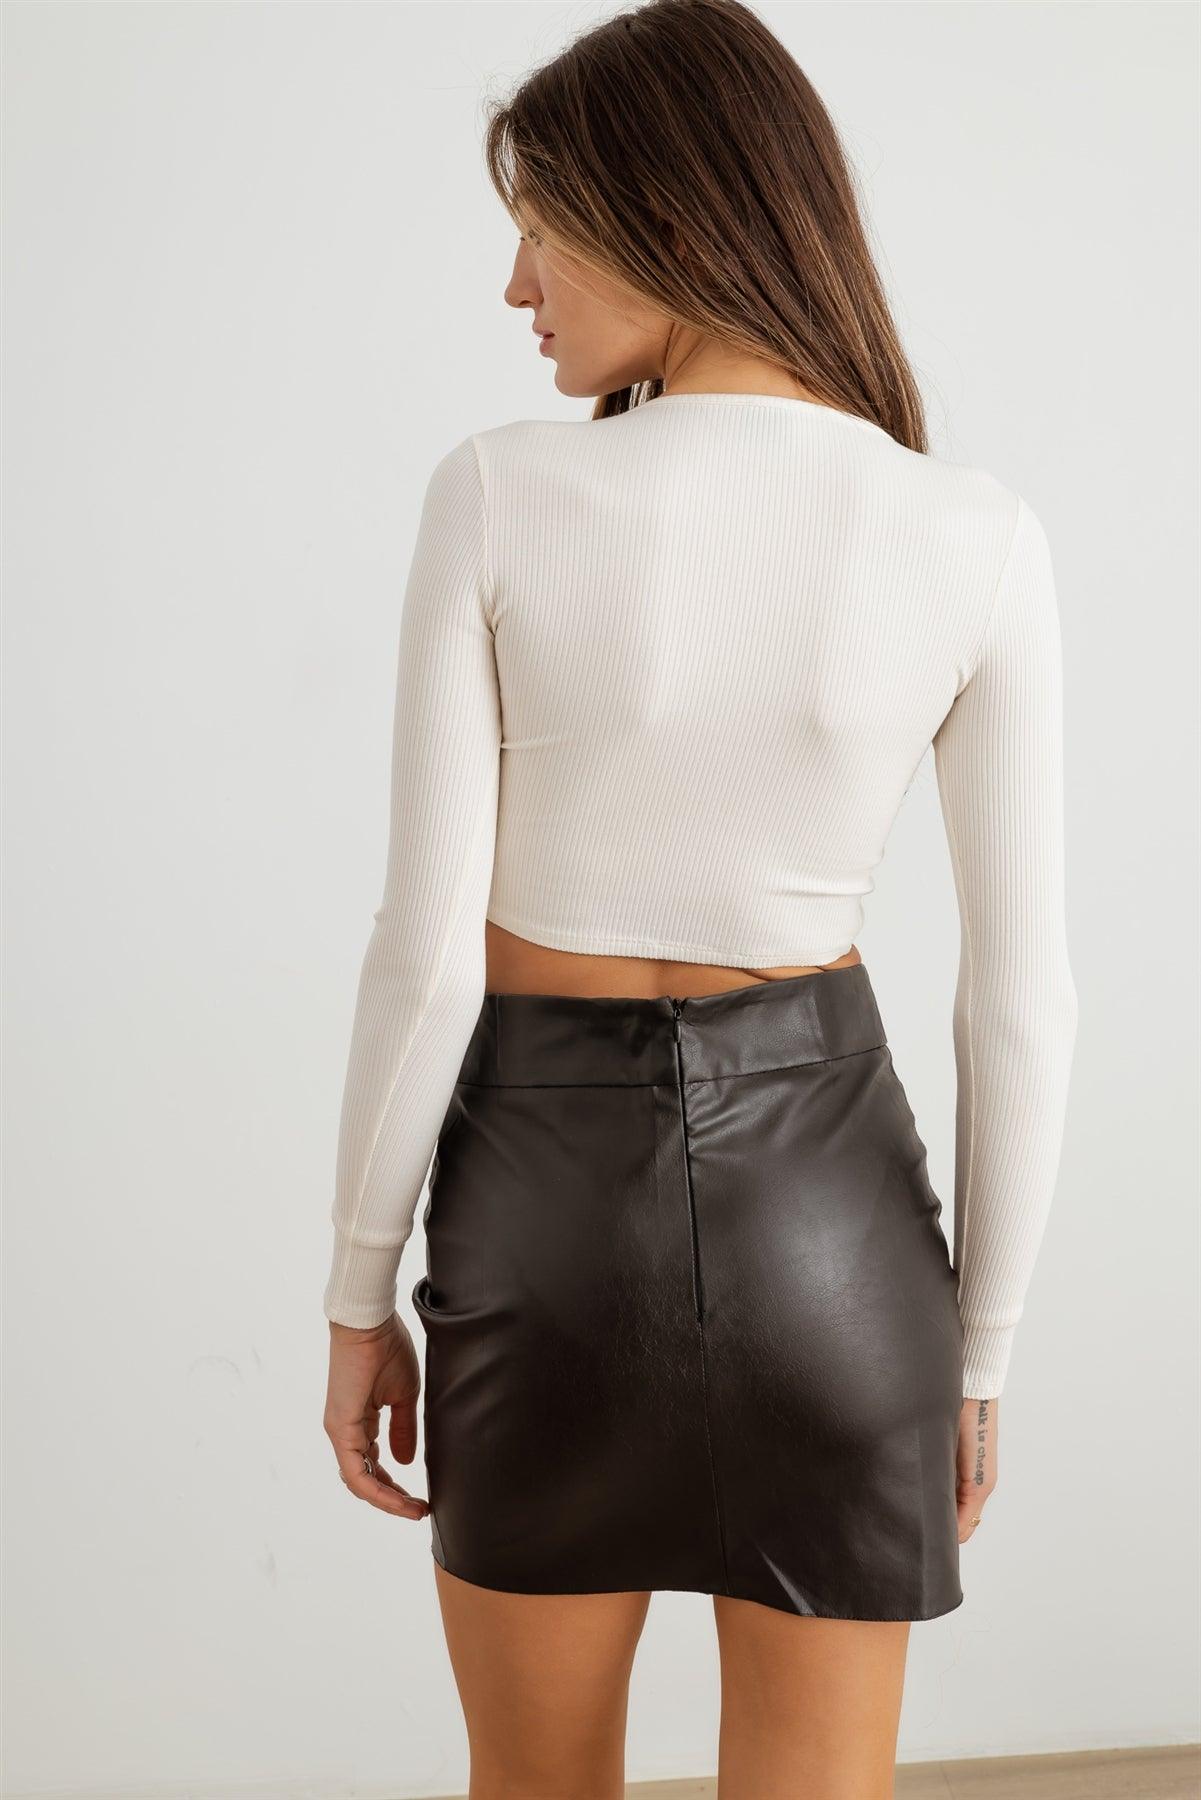 Off-White Ribbed Front Cut-Out Twist Long Sleeve Crop Top /2-2-2